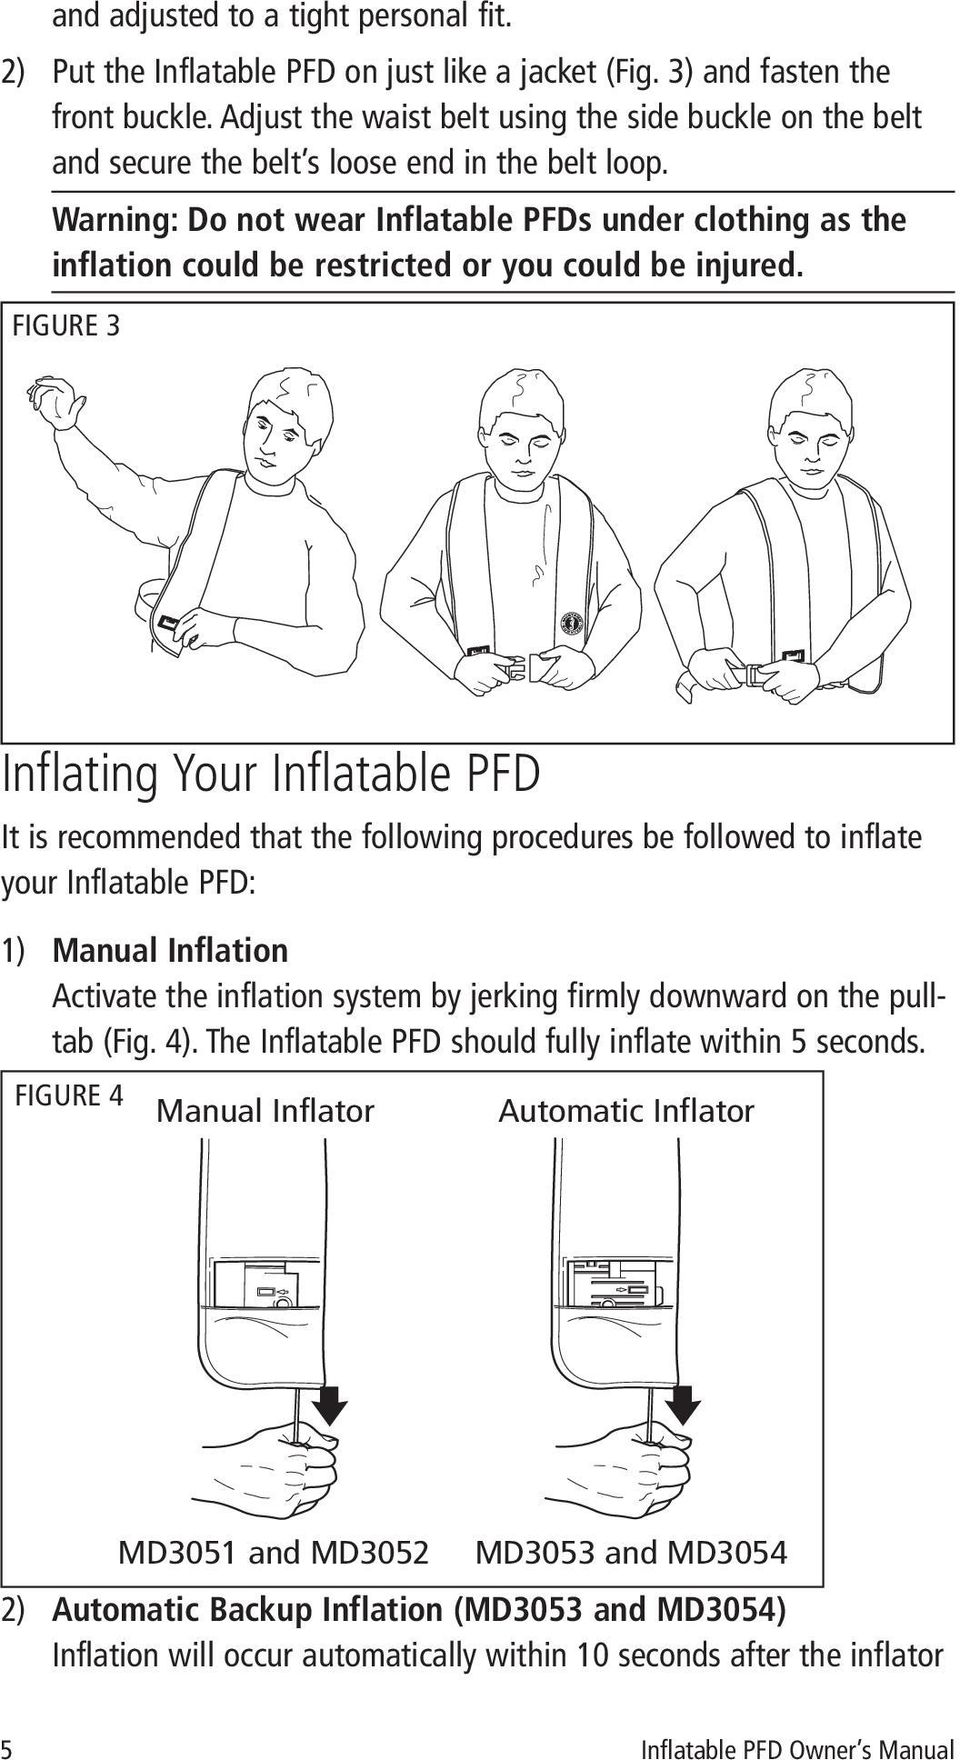 Warning: Do not wear Inflatable PFDs under clothing as the inflation could be restricted or you could be injured.